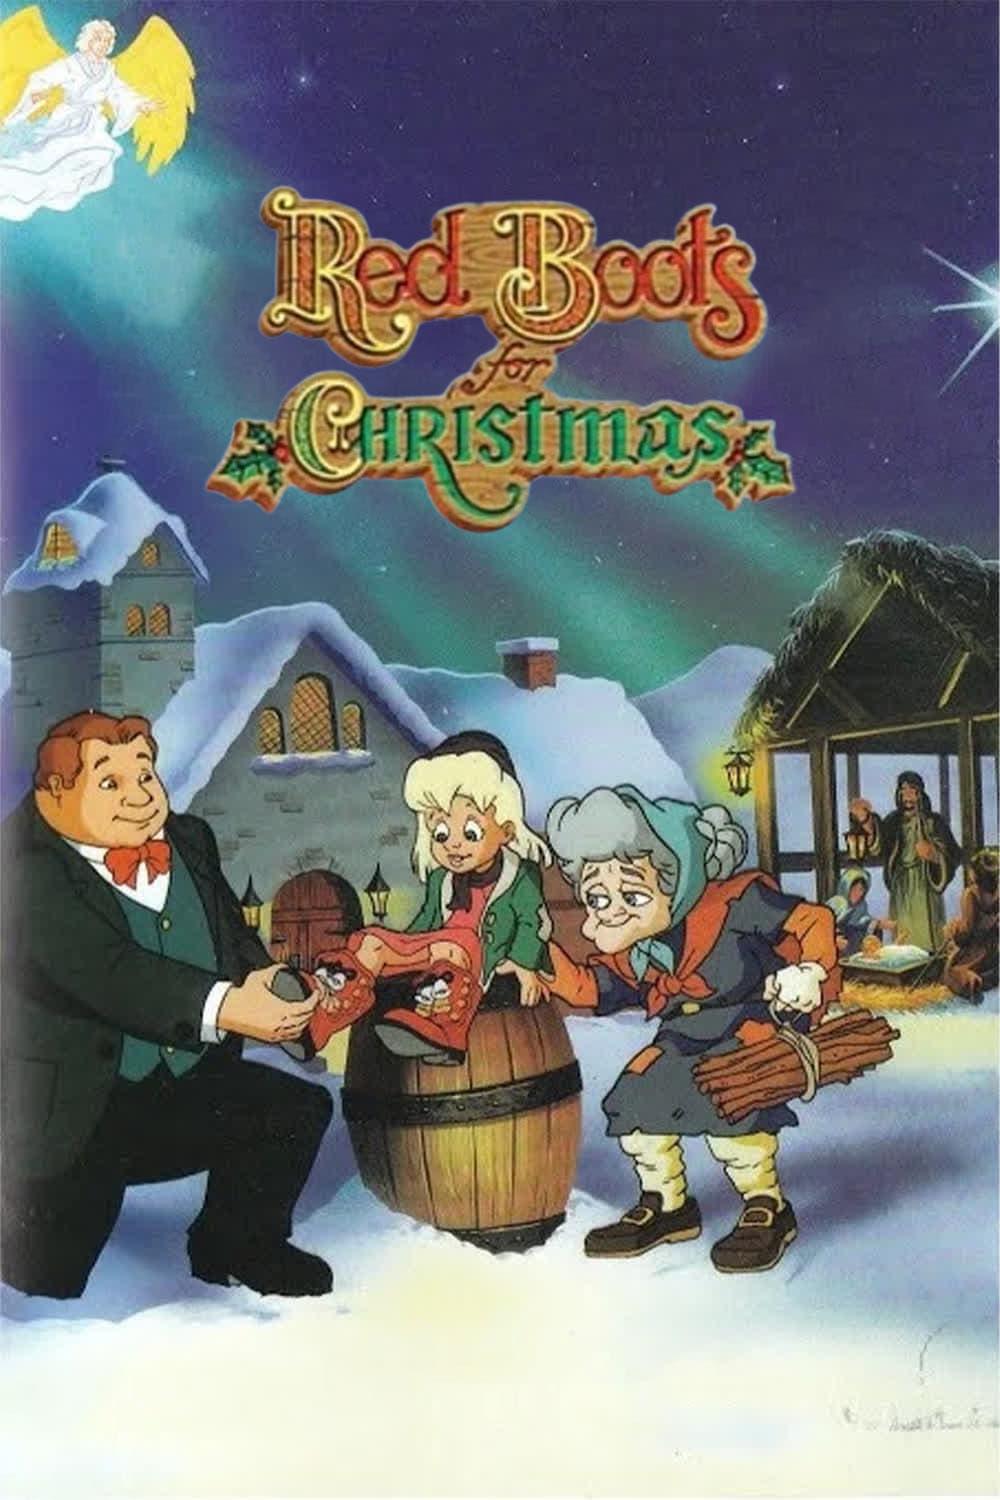 Red Boots for Christmas poster